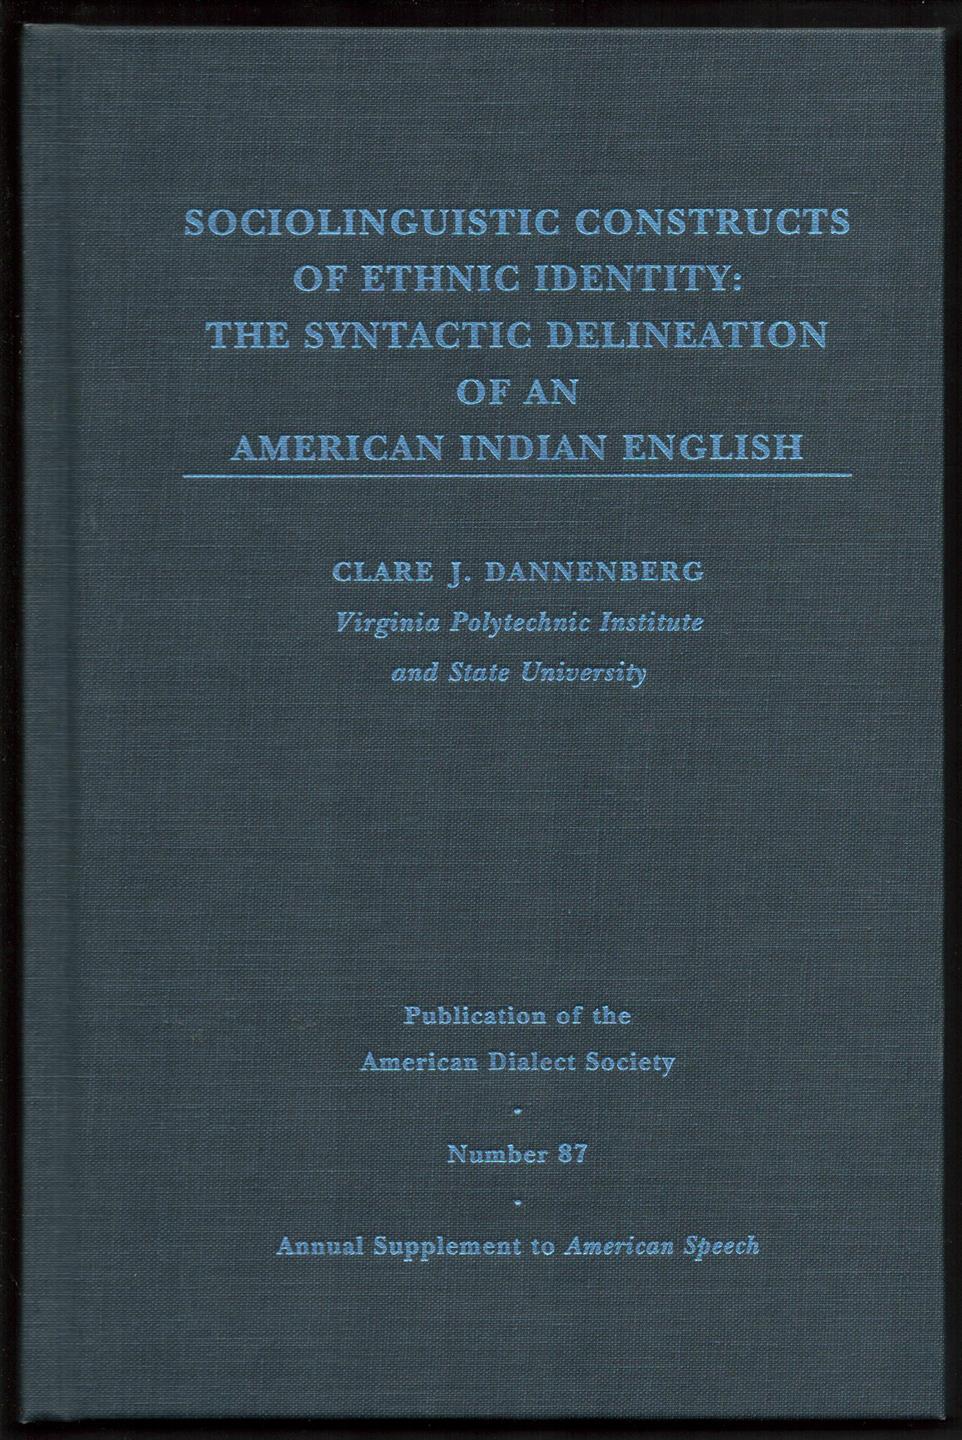 Clare J Dannenberg - Sociolinguistic constructs of ethnic identity: the syntactic delineation of an American Indian English